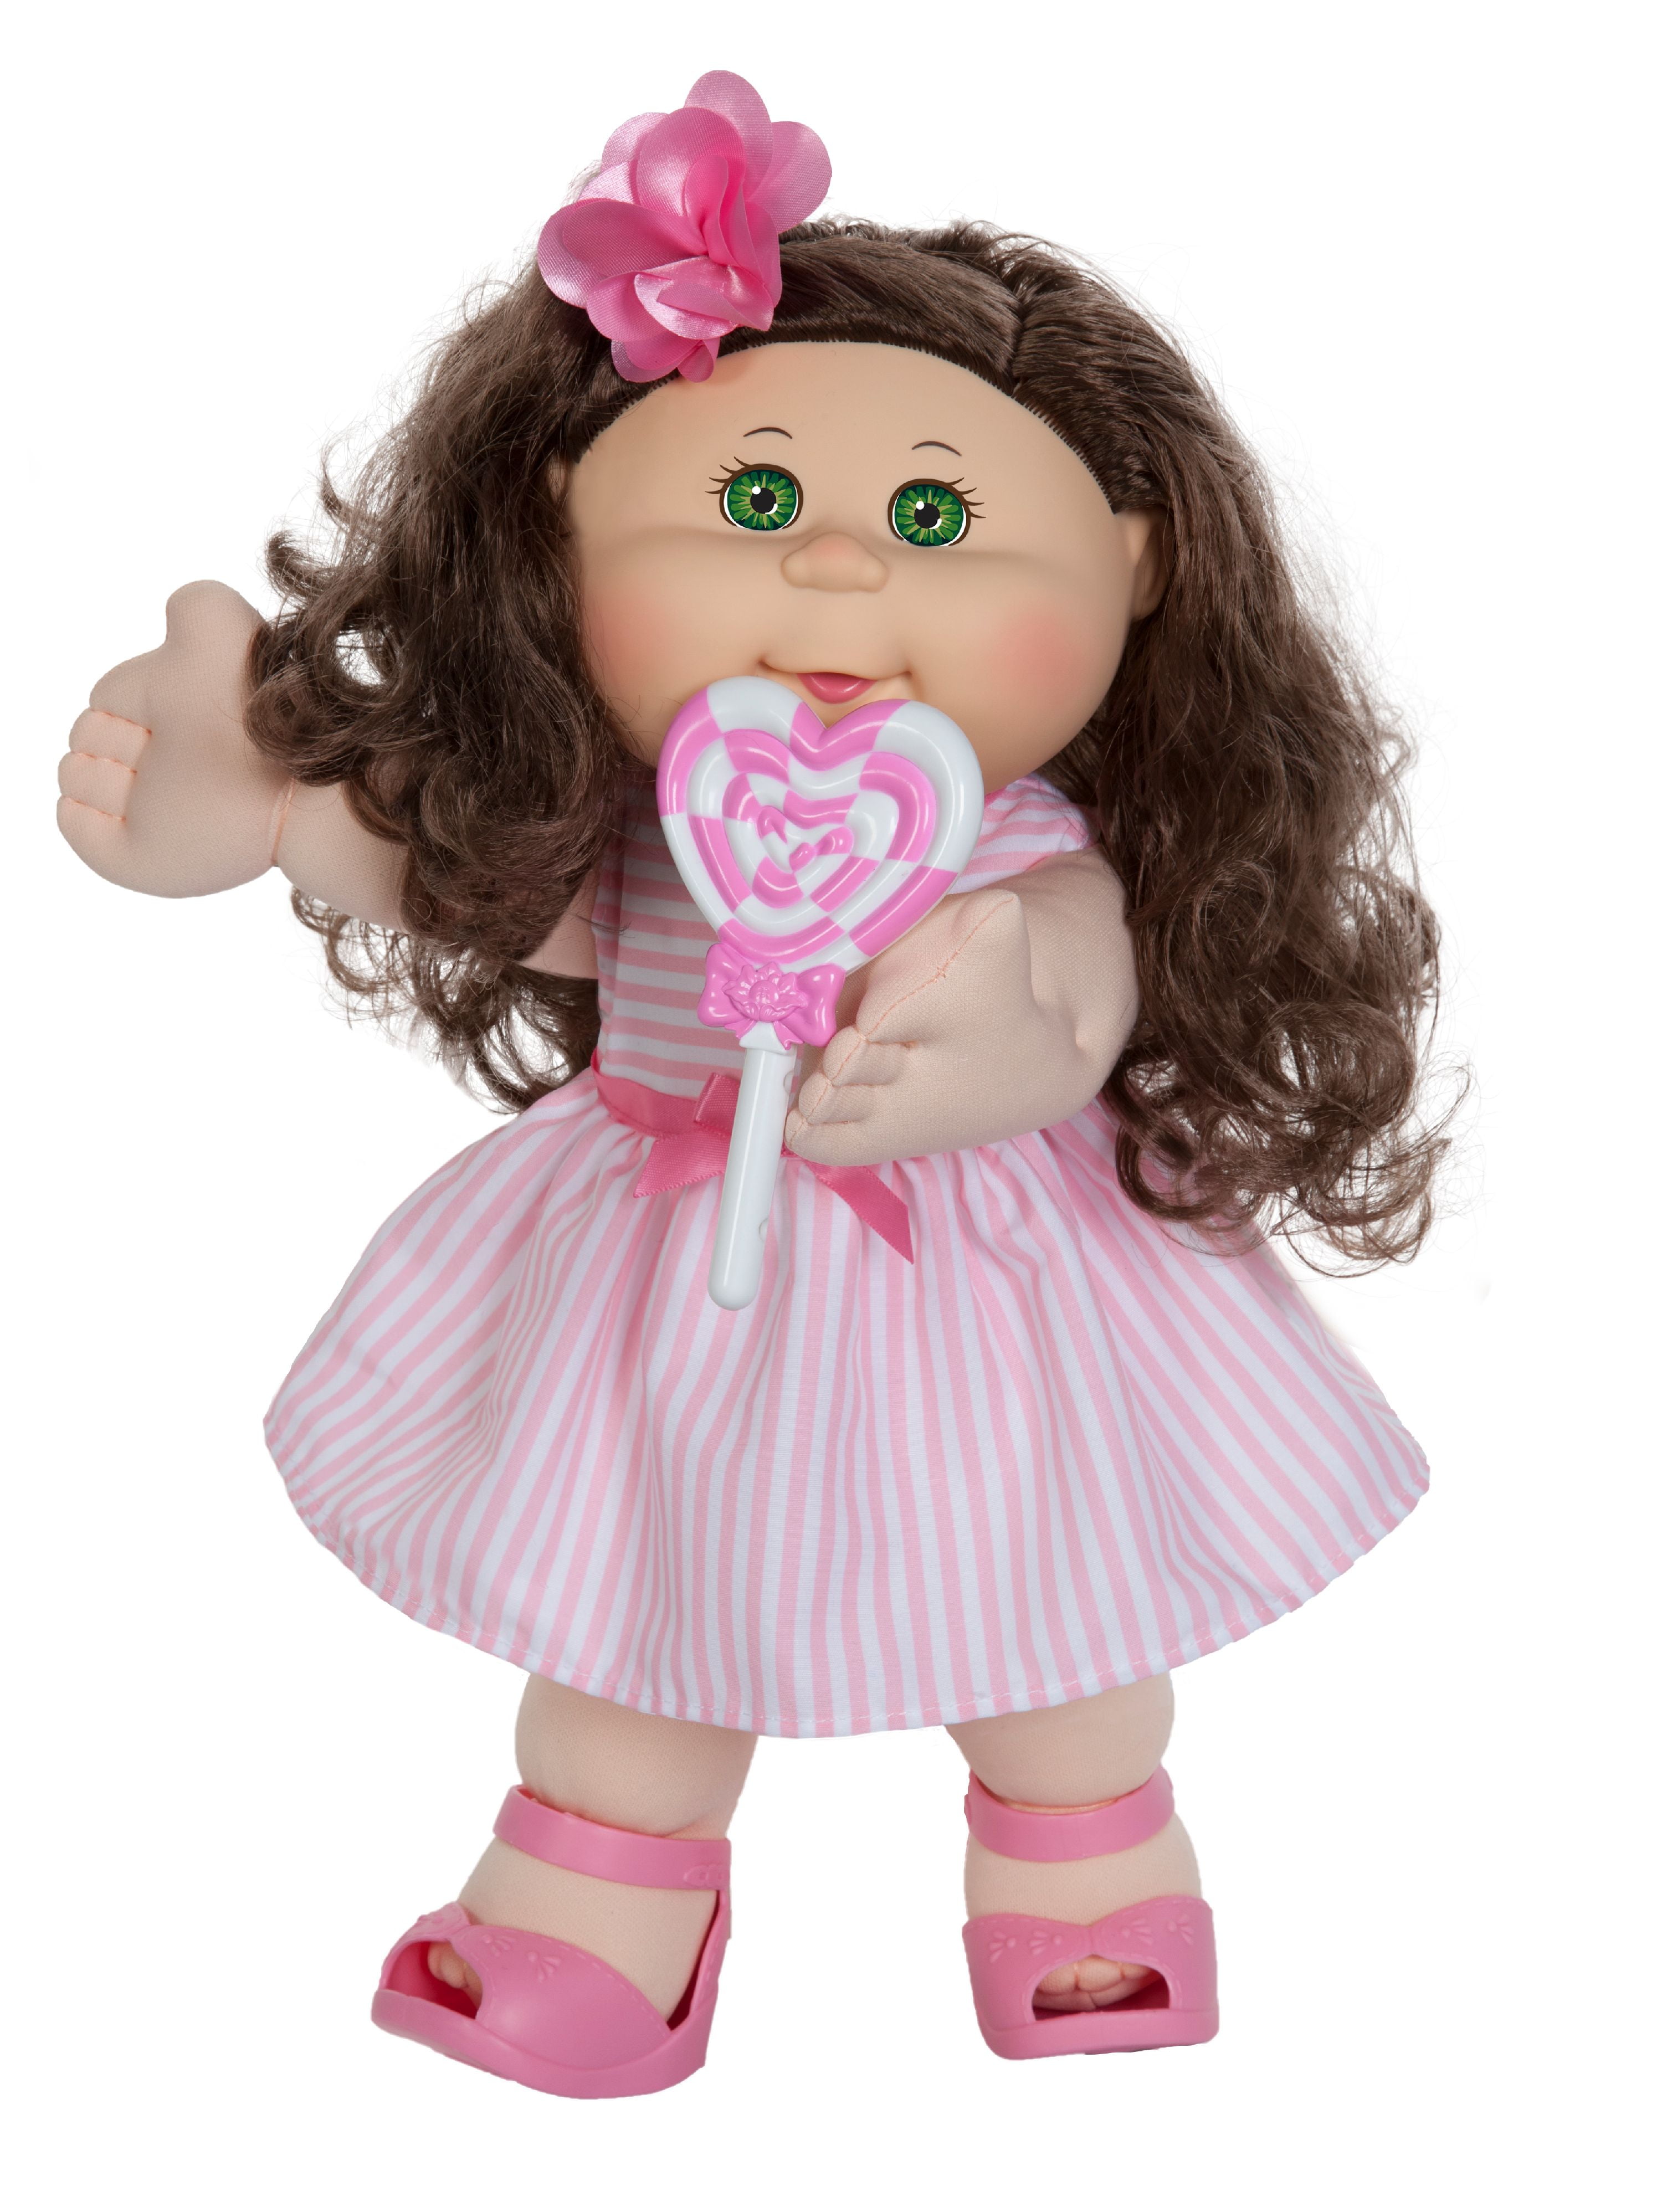 35th anniversary cabbage patch kid